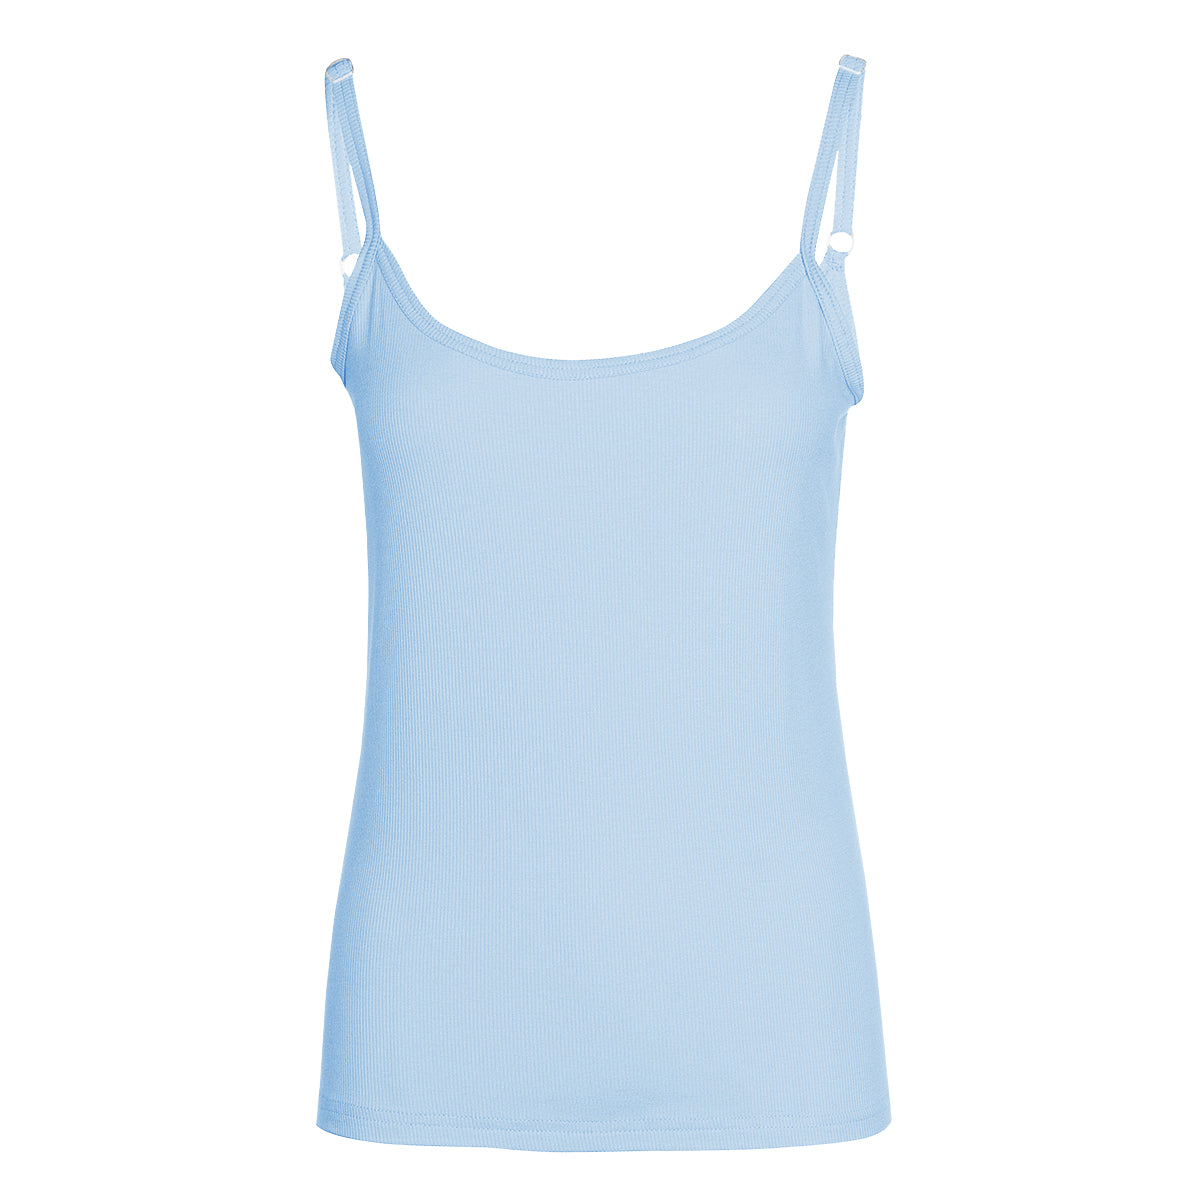 LUXZUZ // ONE TWO Adie Top Top 506 Blue Bell